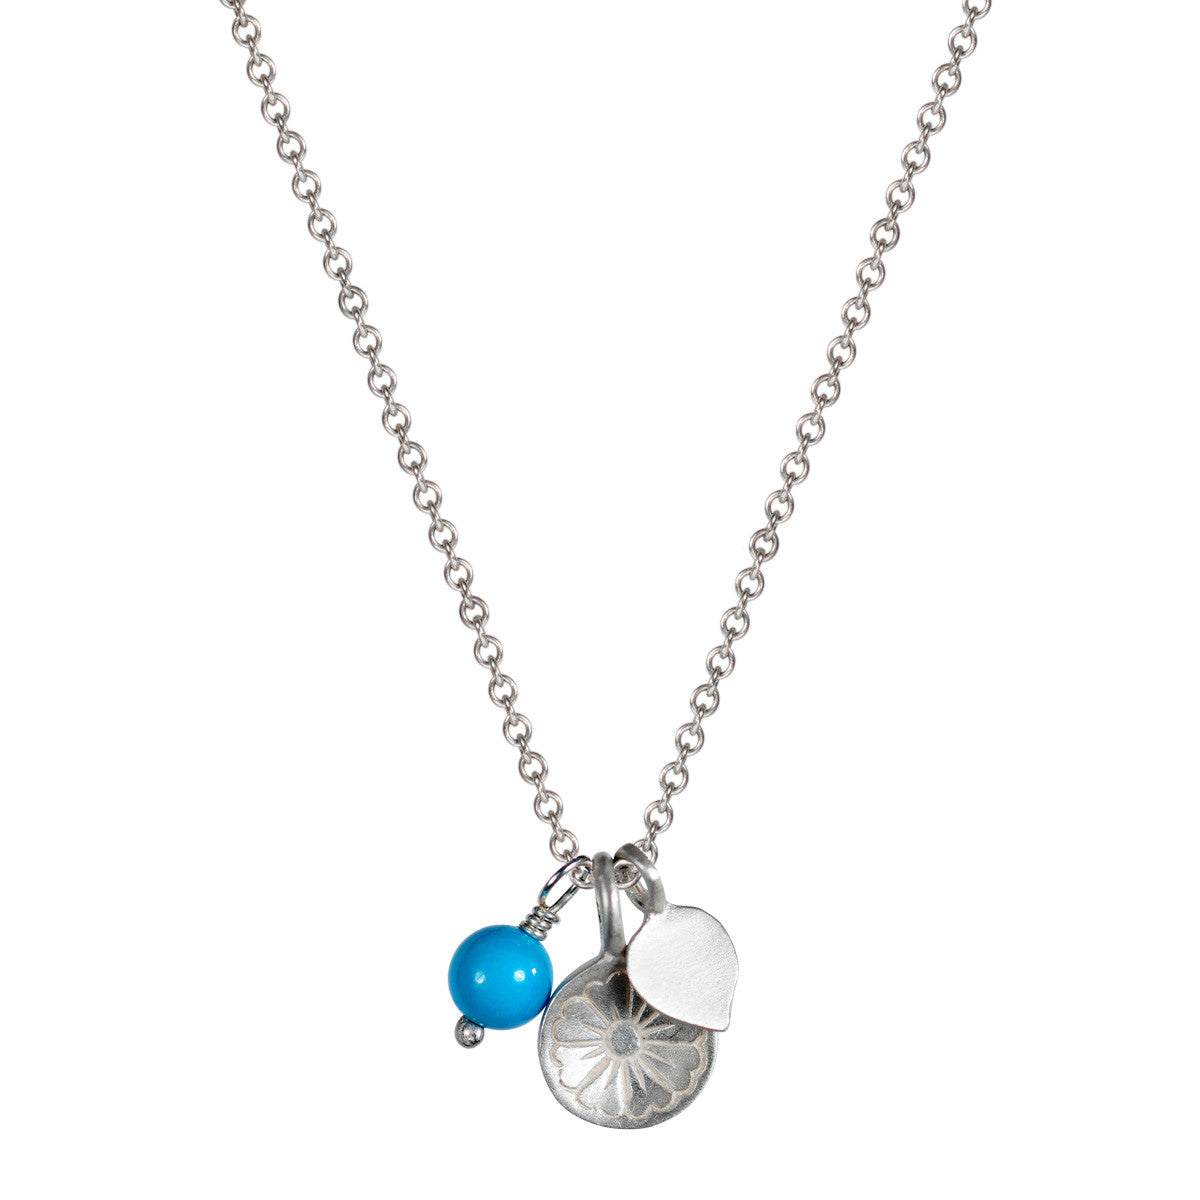 Sterling Silver Flower Trinket with Turquoise Bead Pendant